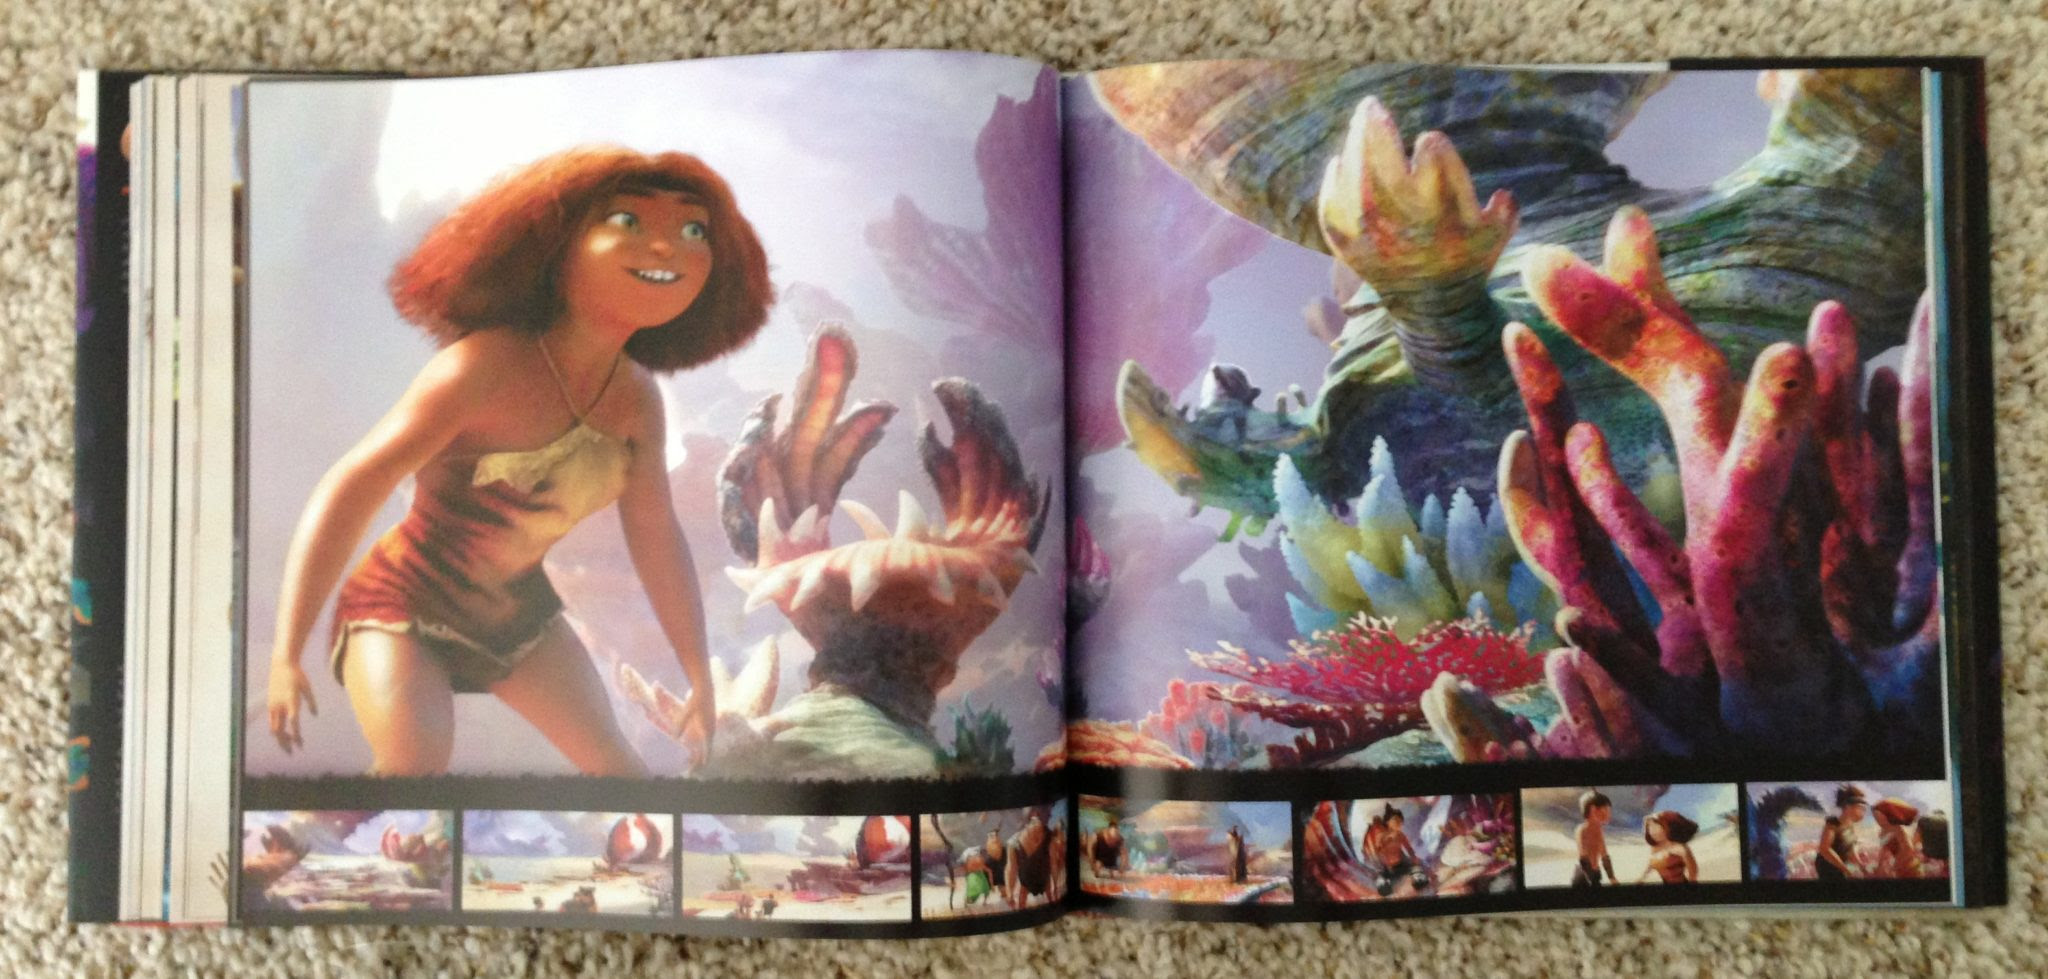 Art Of The Croods Book 5